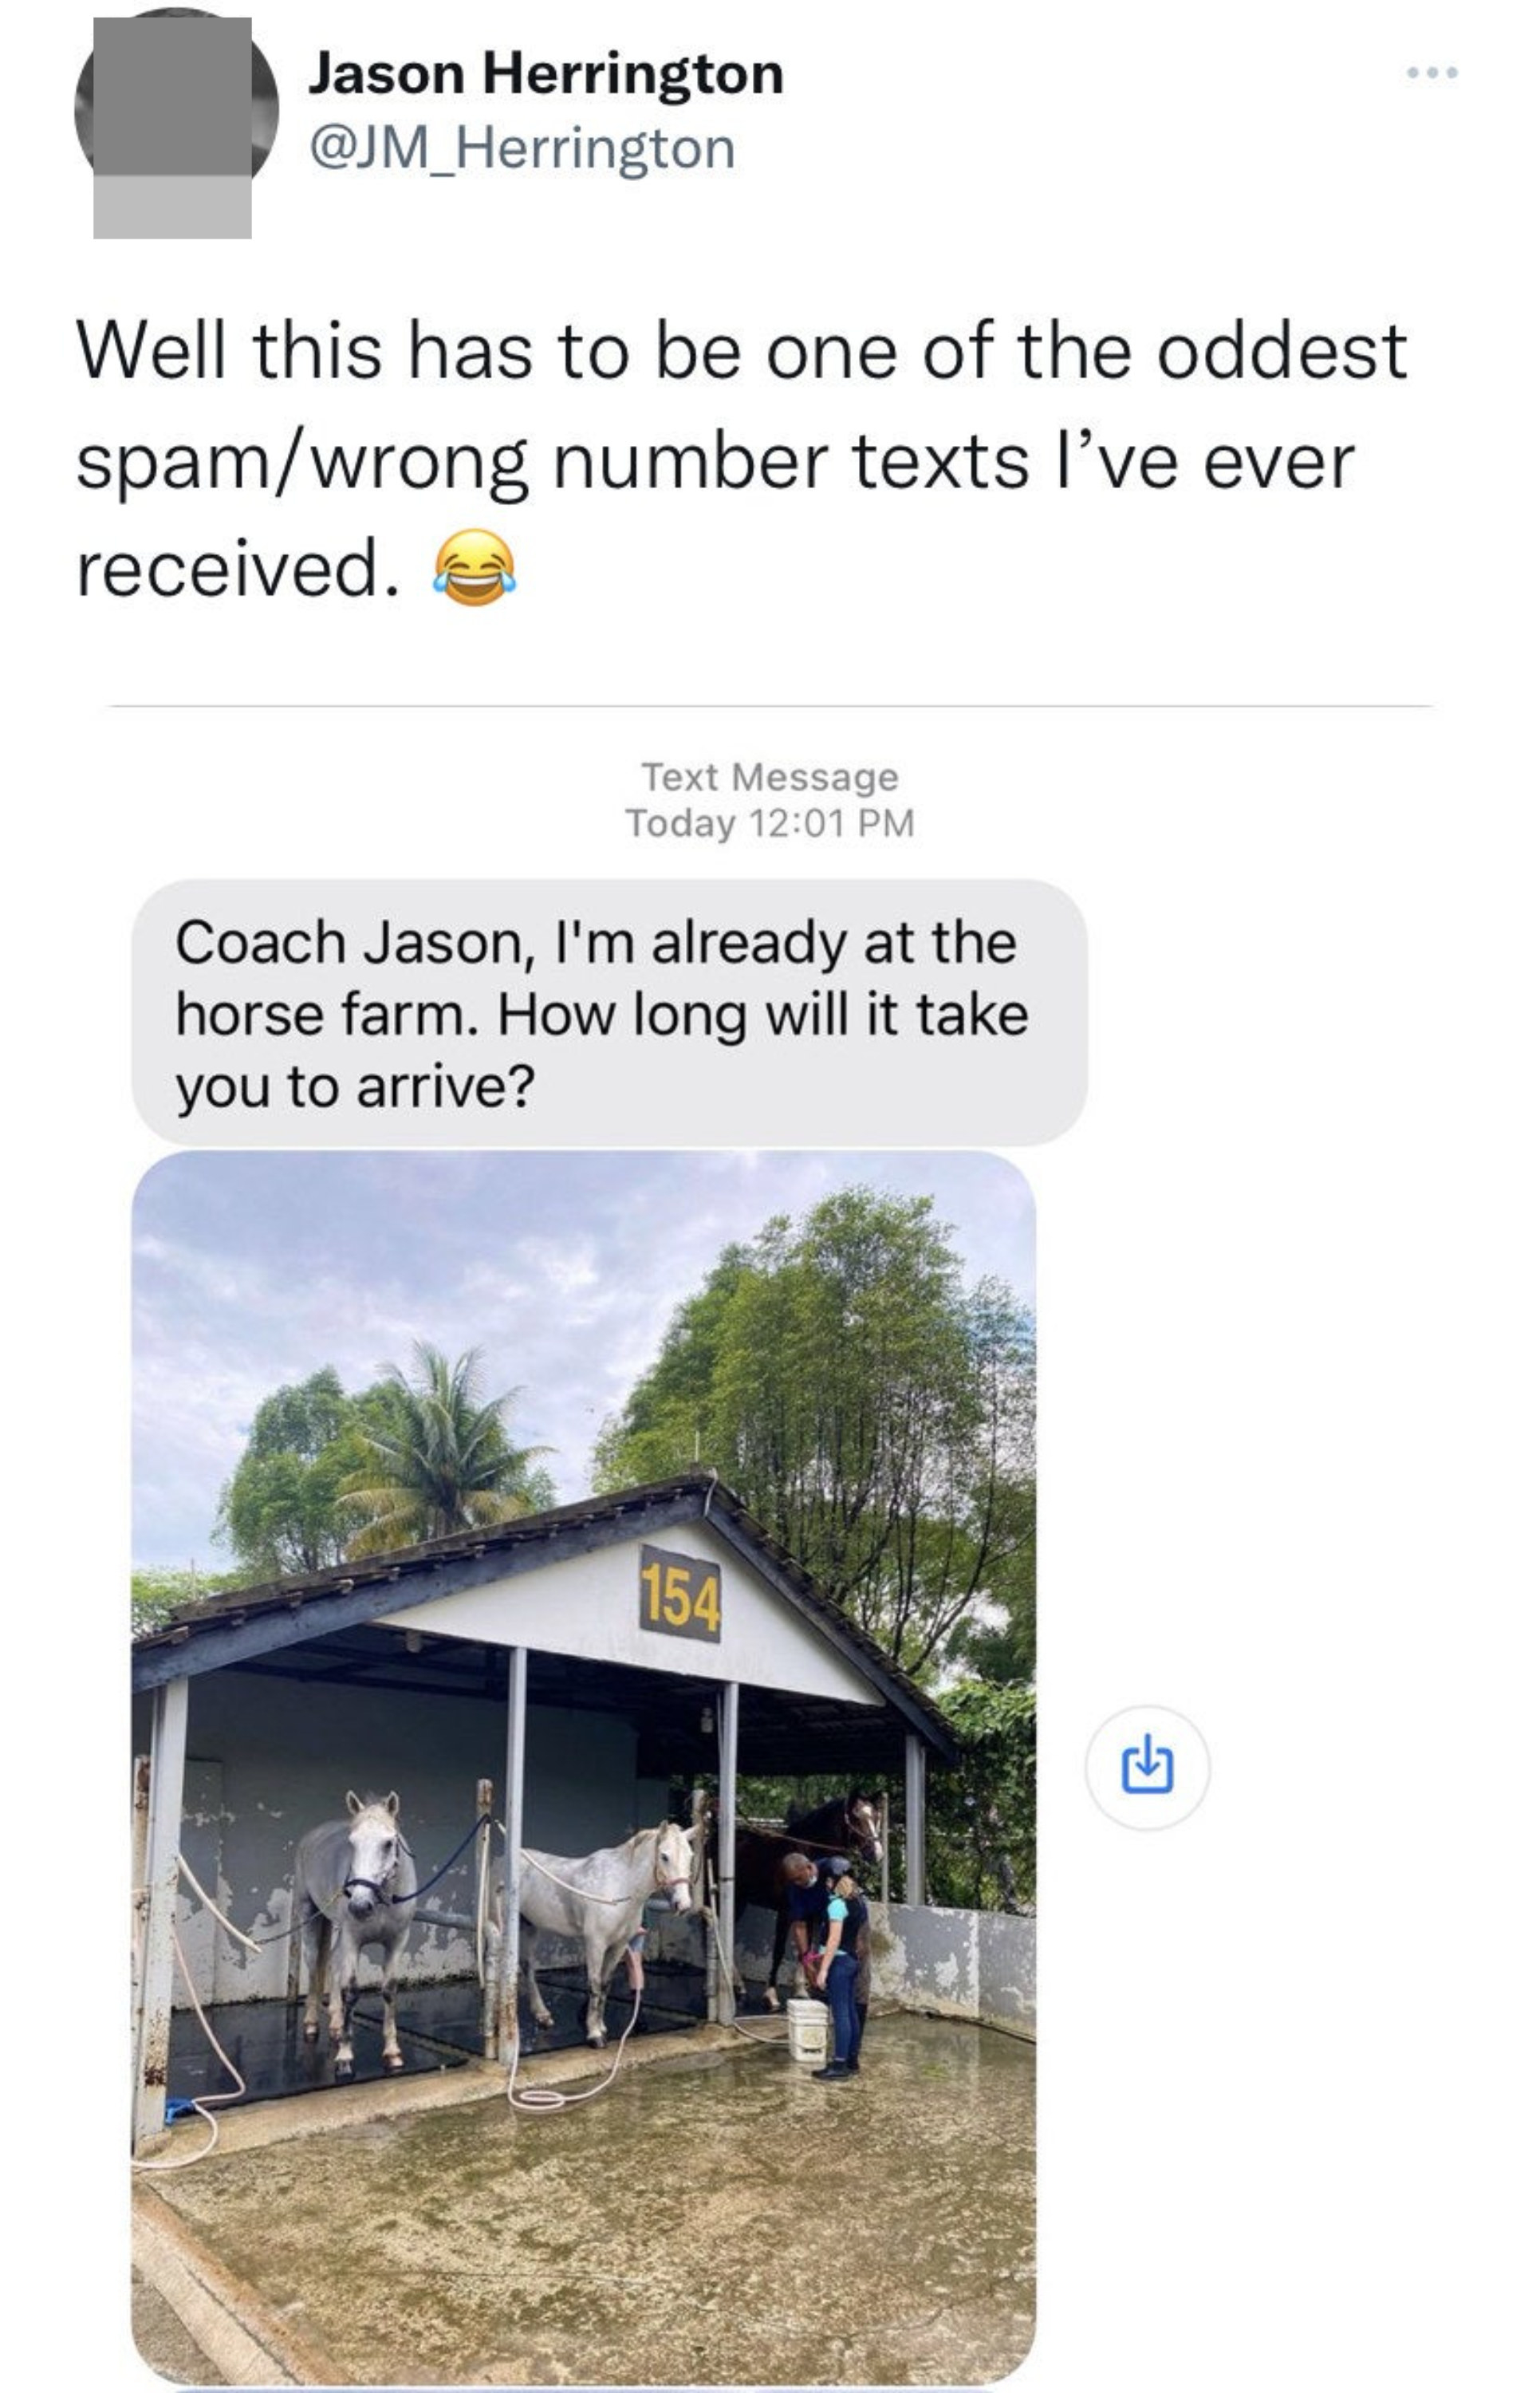 Text with a photo of two horses in a barn asks, &quot;Coach, I&#x27;m already at the horse farm; how long will it take you to arrive?&quot;